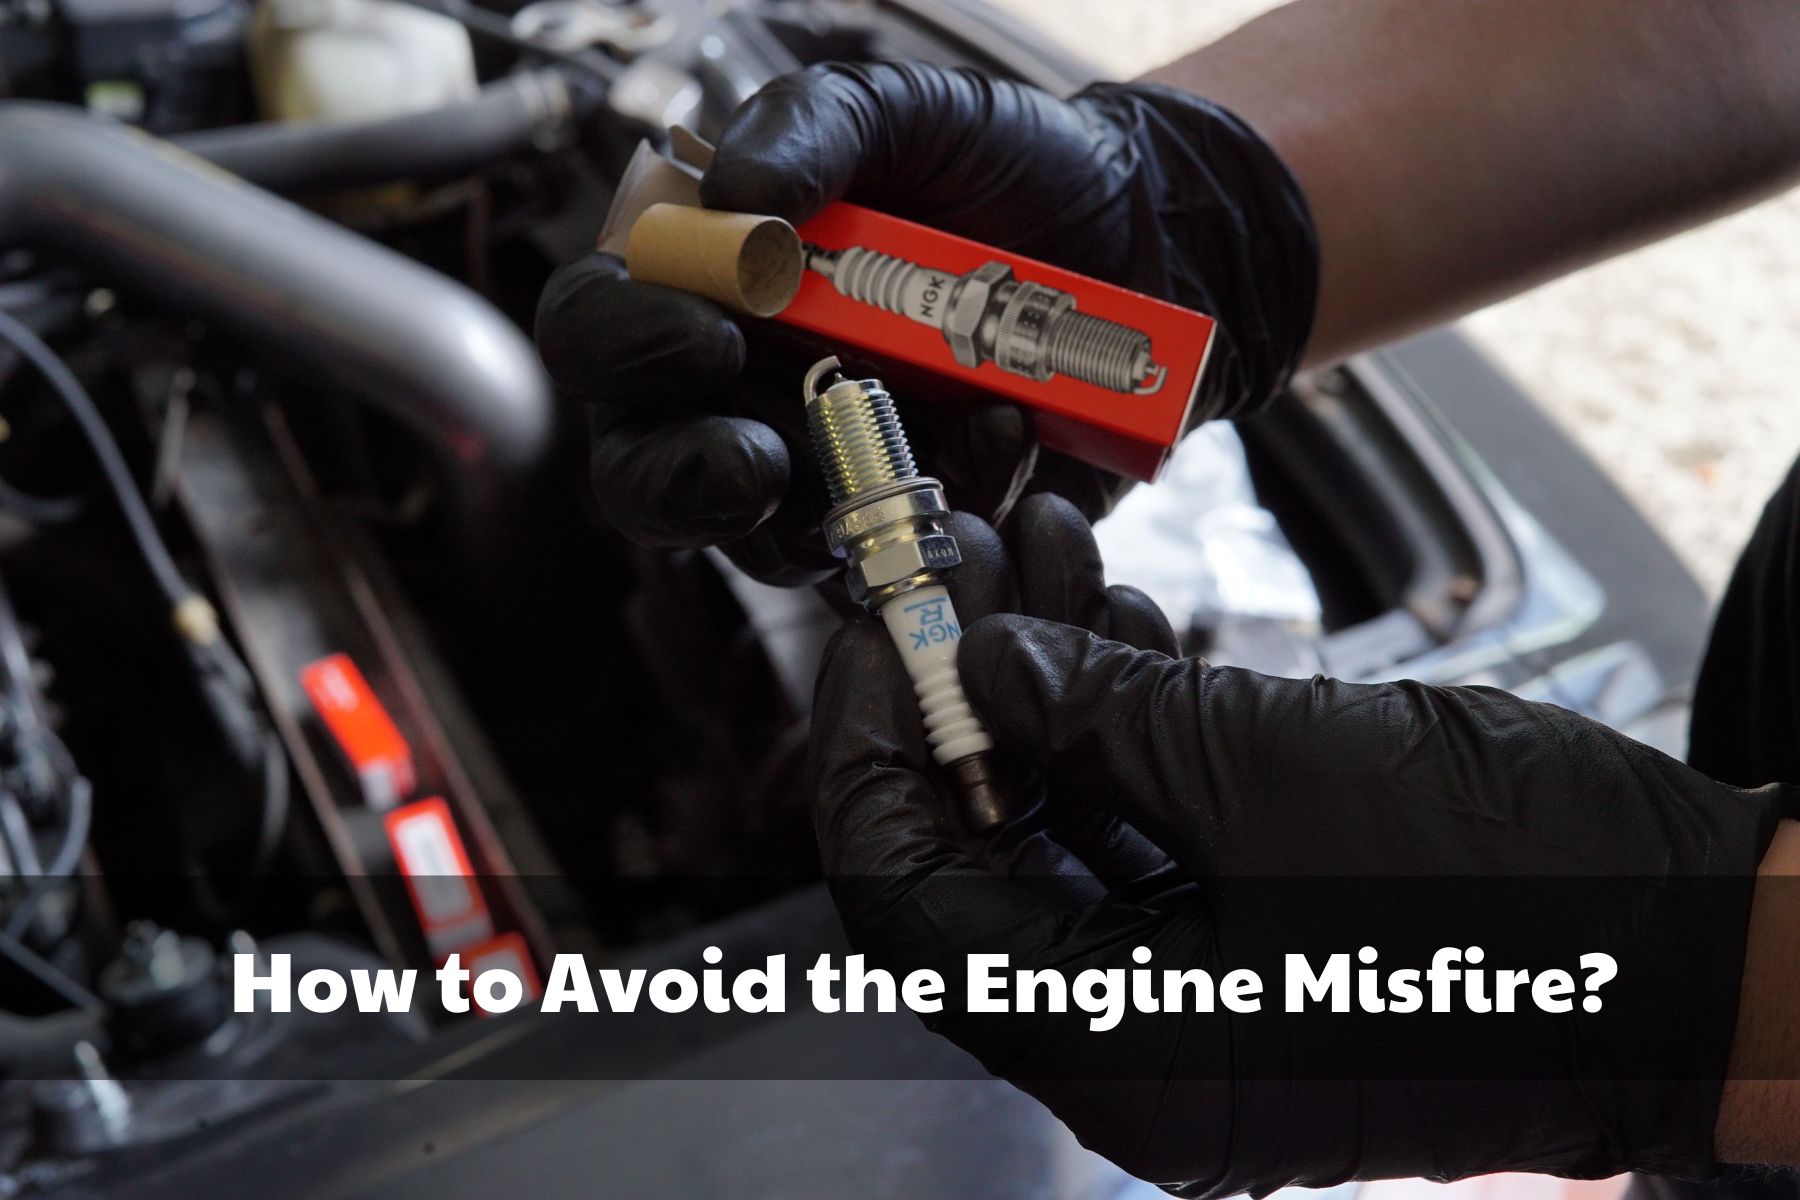 How-To-Fix A-Misfiring-Engine 2